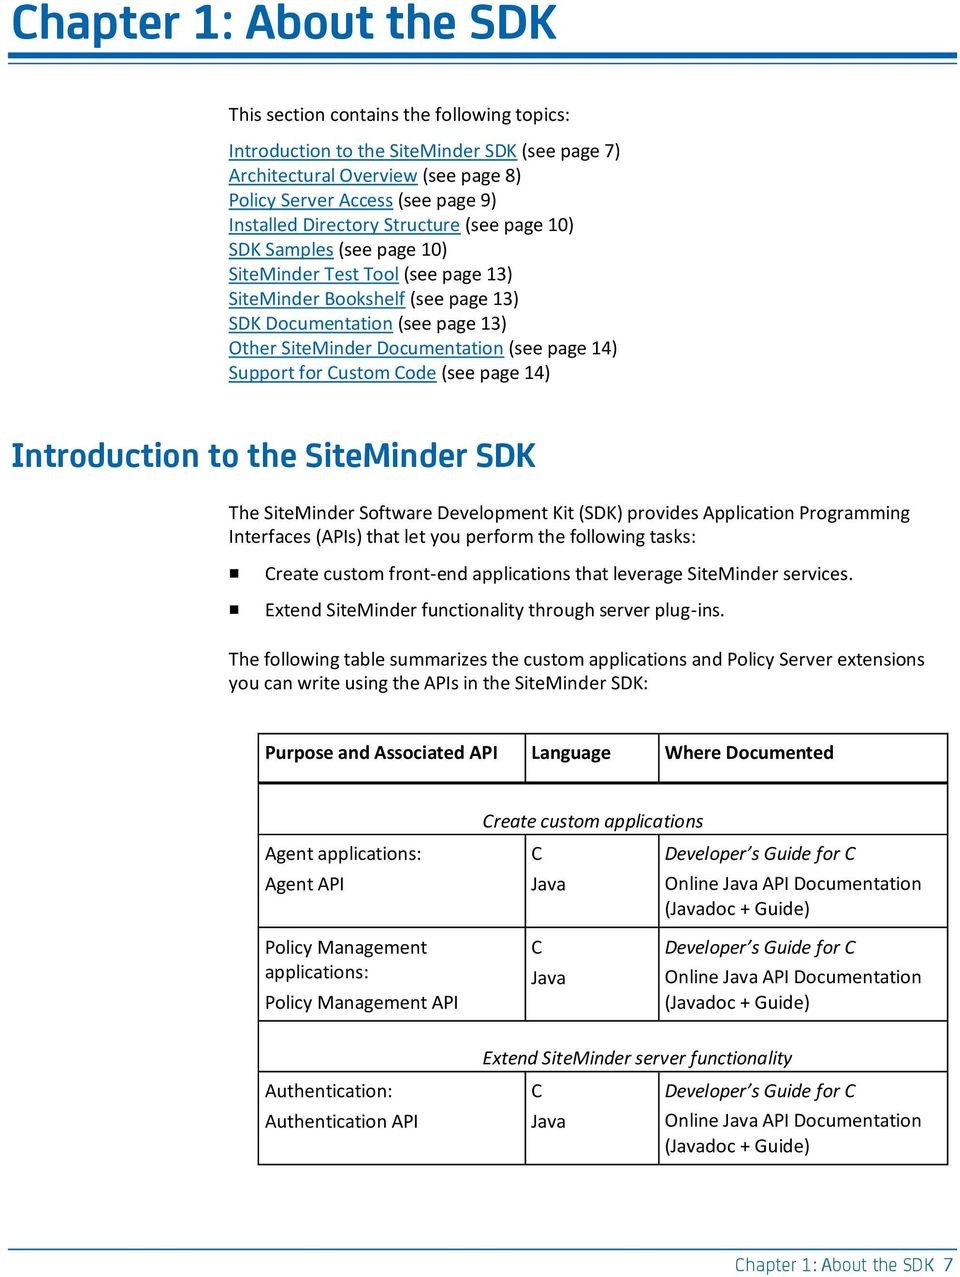 page 14) Support for ustom ode (see page 14) Introduction to the SiteMinder SDK The SiteMinder Software Development Kit (SDK) provides Application Programming Interfaces (APIs) that let you perform